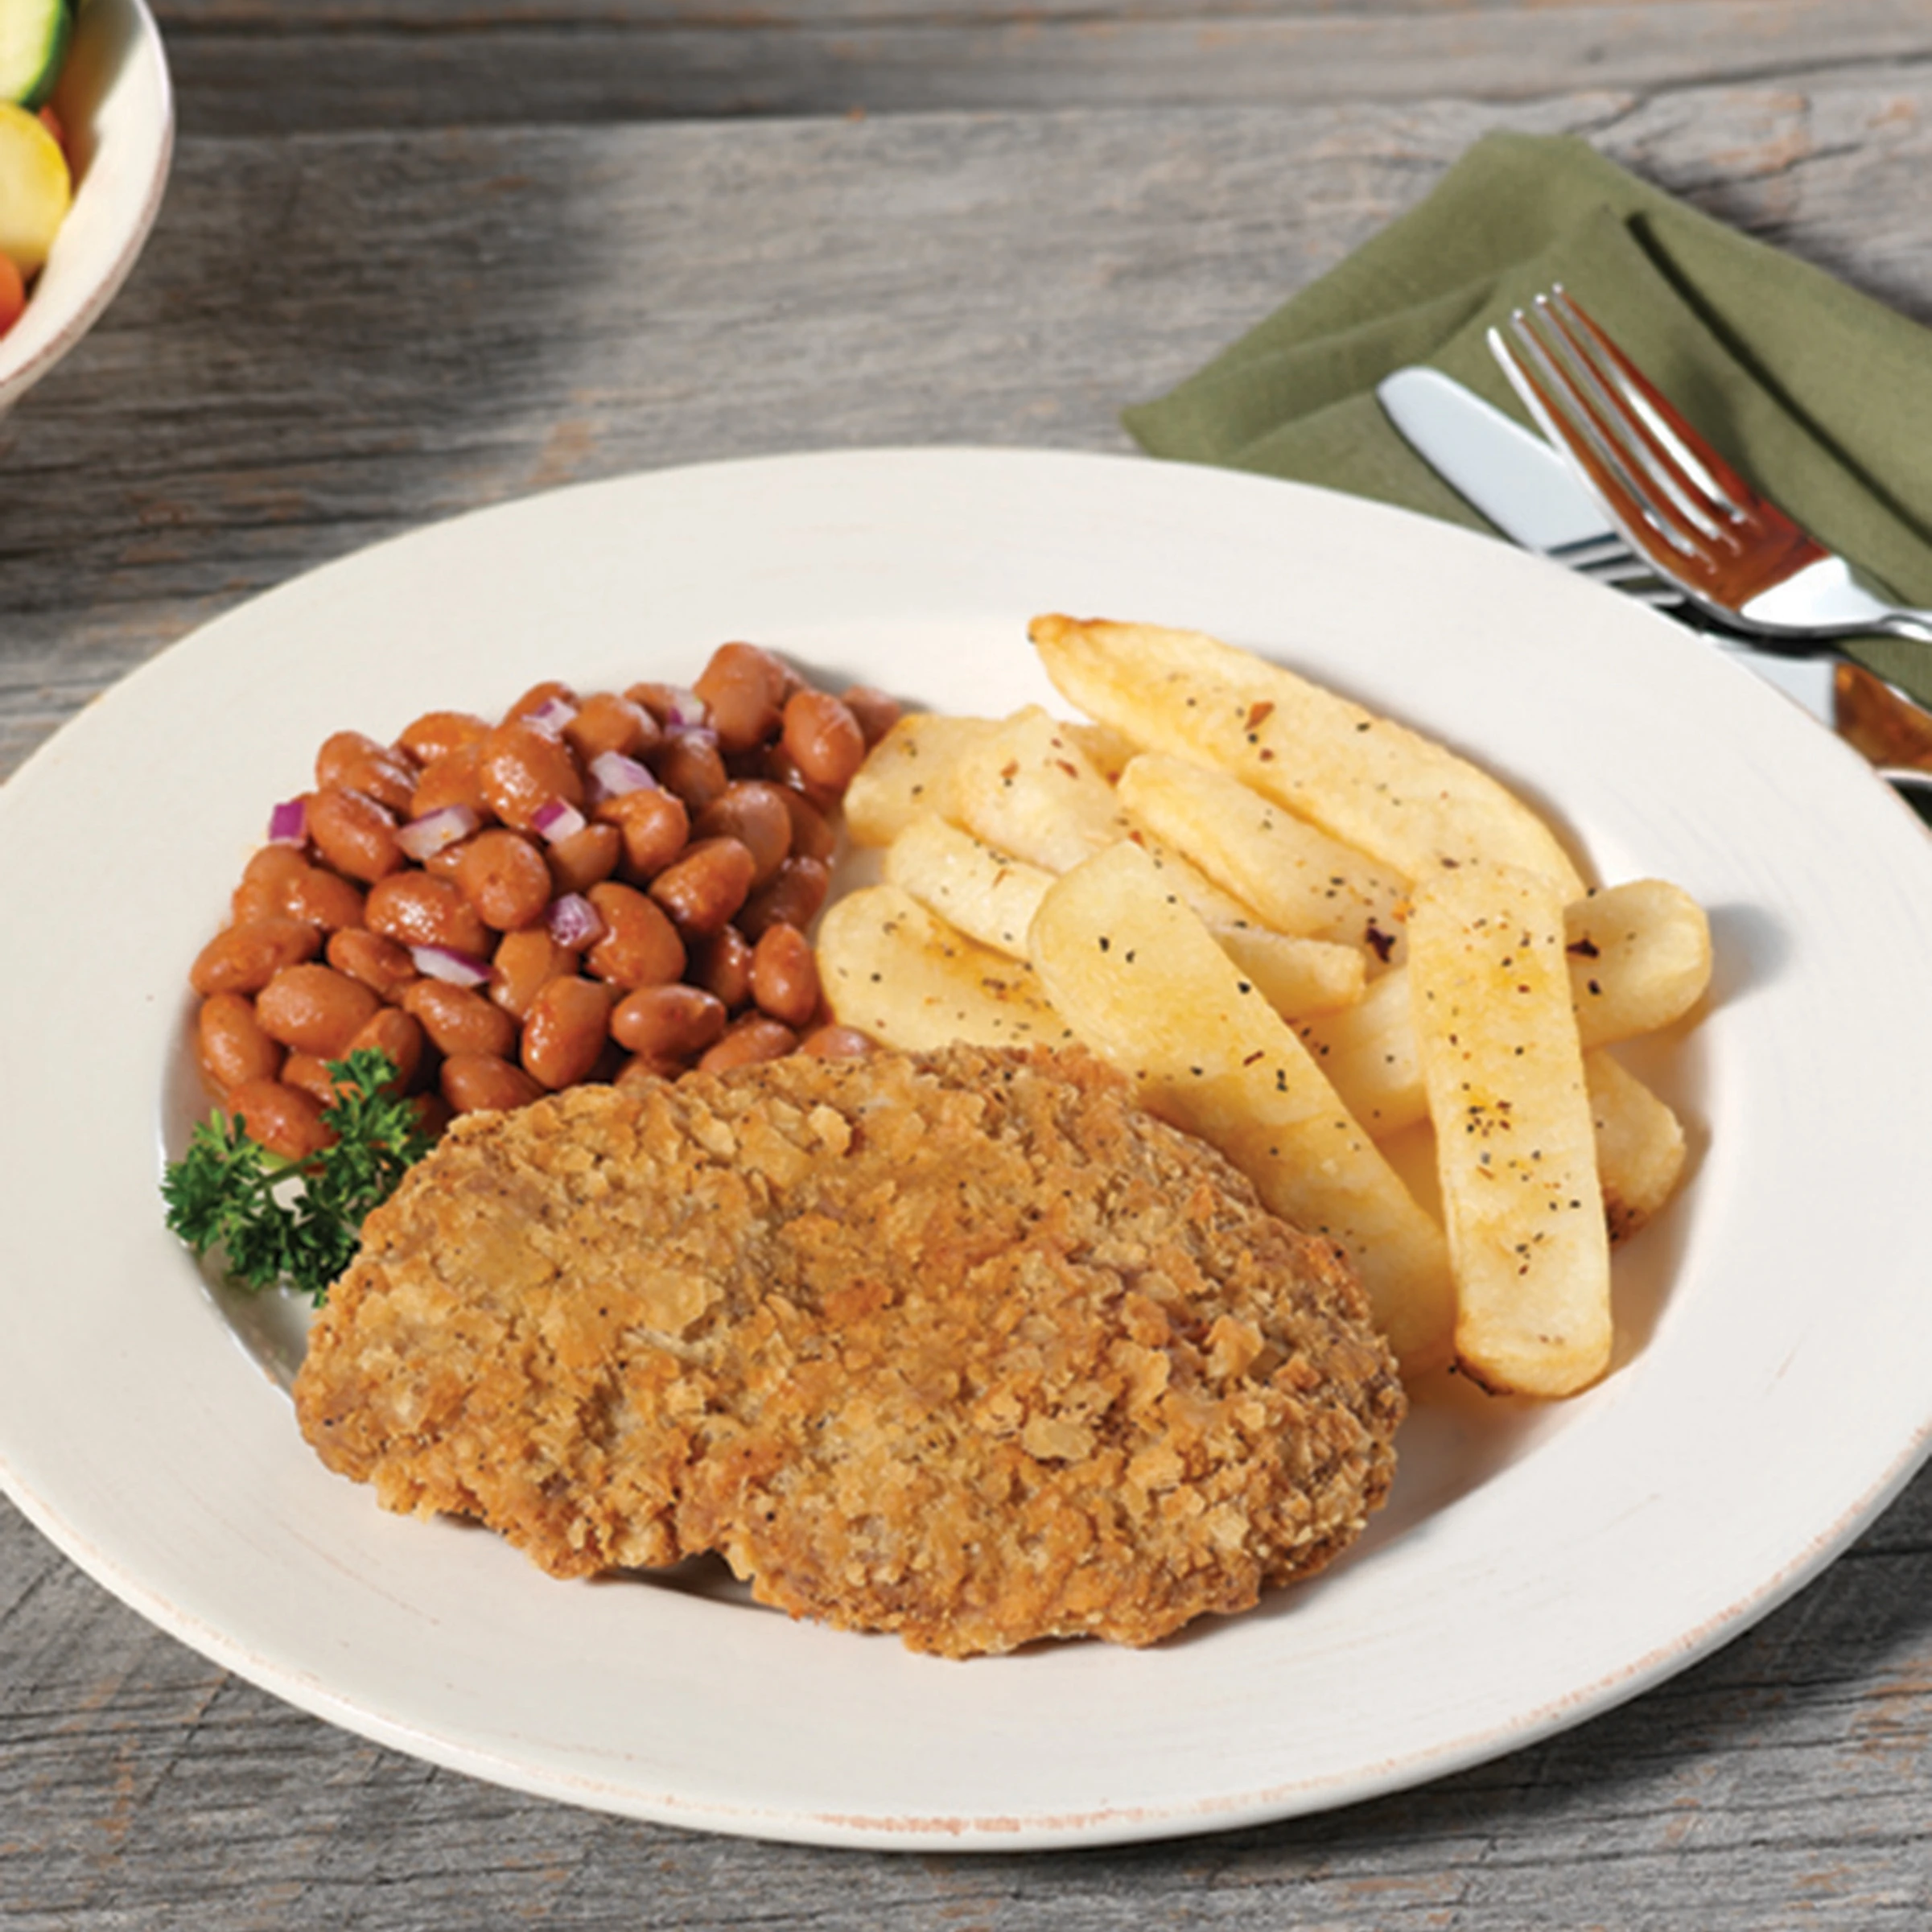 AdvancePierre™ Gold Label Exclusive Cut® The SUPERNATURAL Whole Muscle Raw Breaded Country Fried Beef Steak Fritters, 5.33 oz, Approx. 30 Pieces, 10 Lbshttp://images.salsify.com/image/upload/s--T3fdrBpQ--/alj95yrcbagvlk9stzax.webp